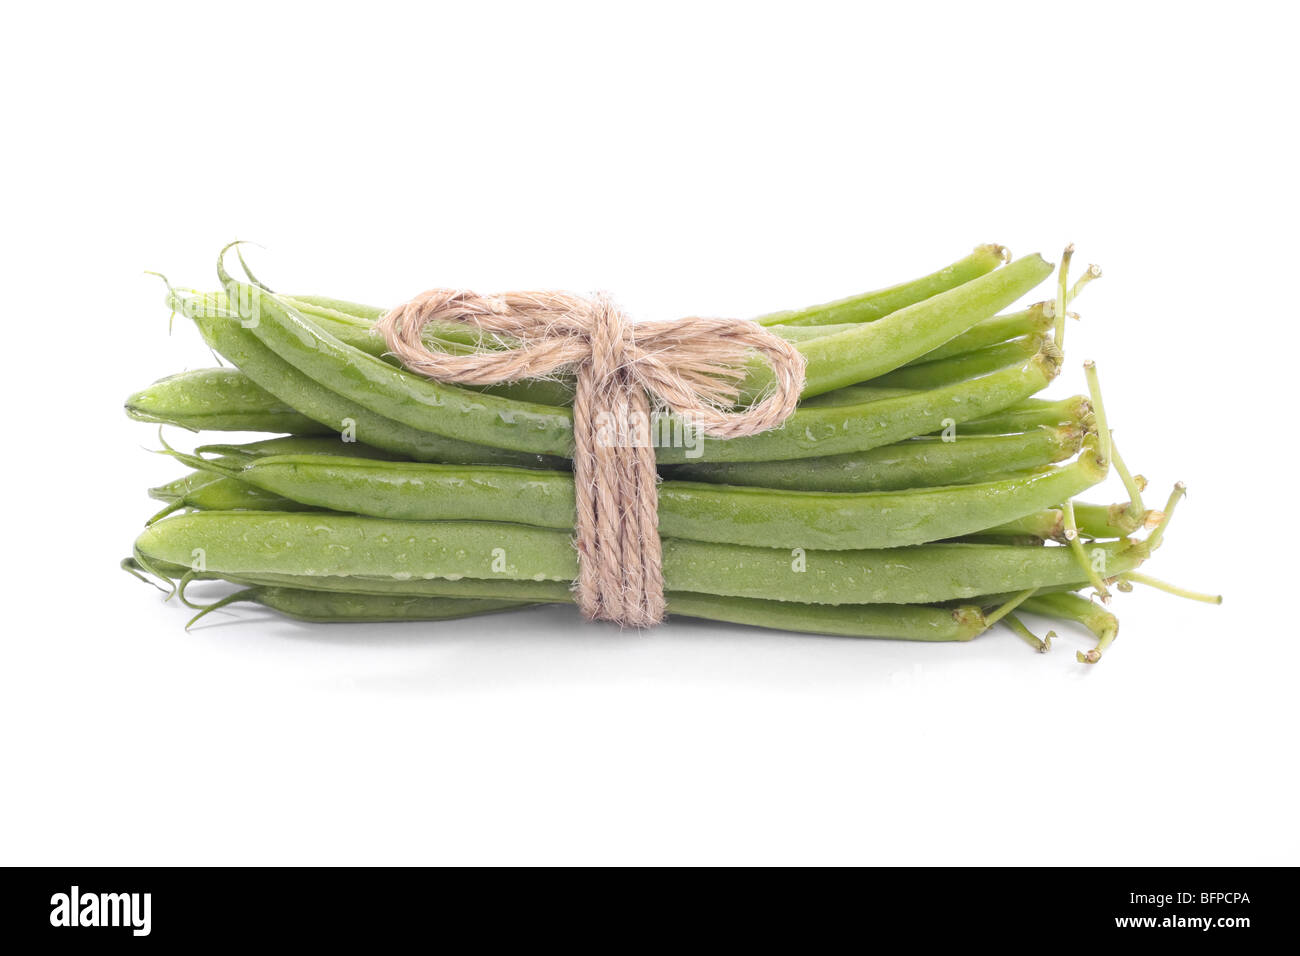 Bunch of green beans on white background Stock Photo